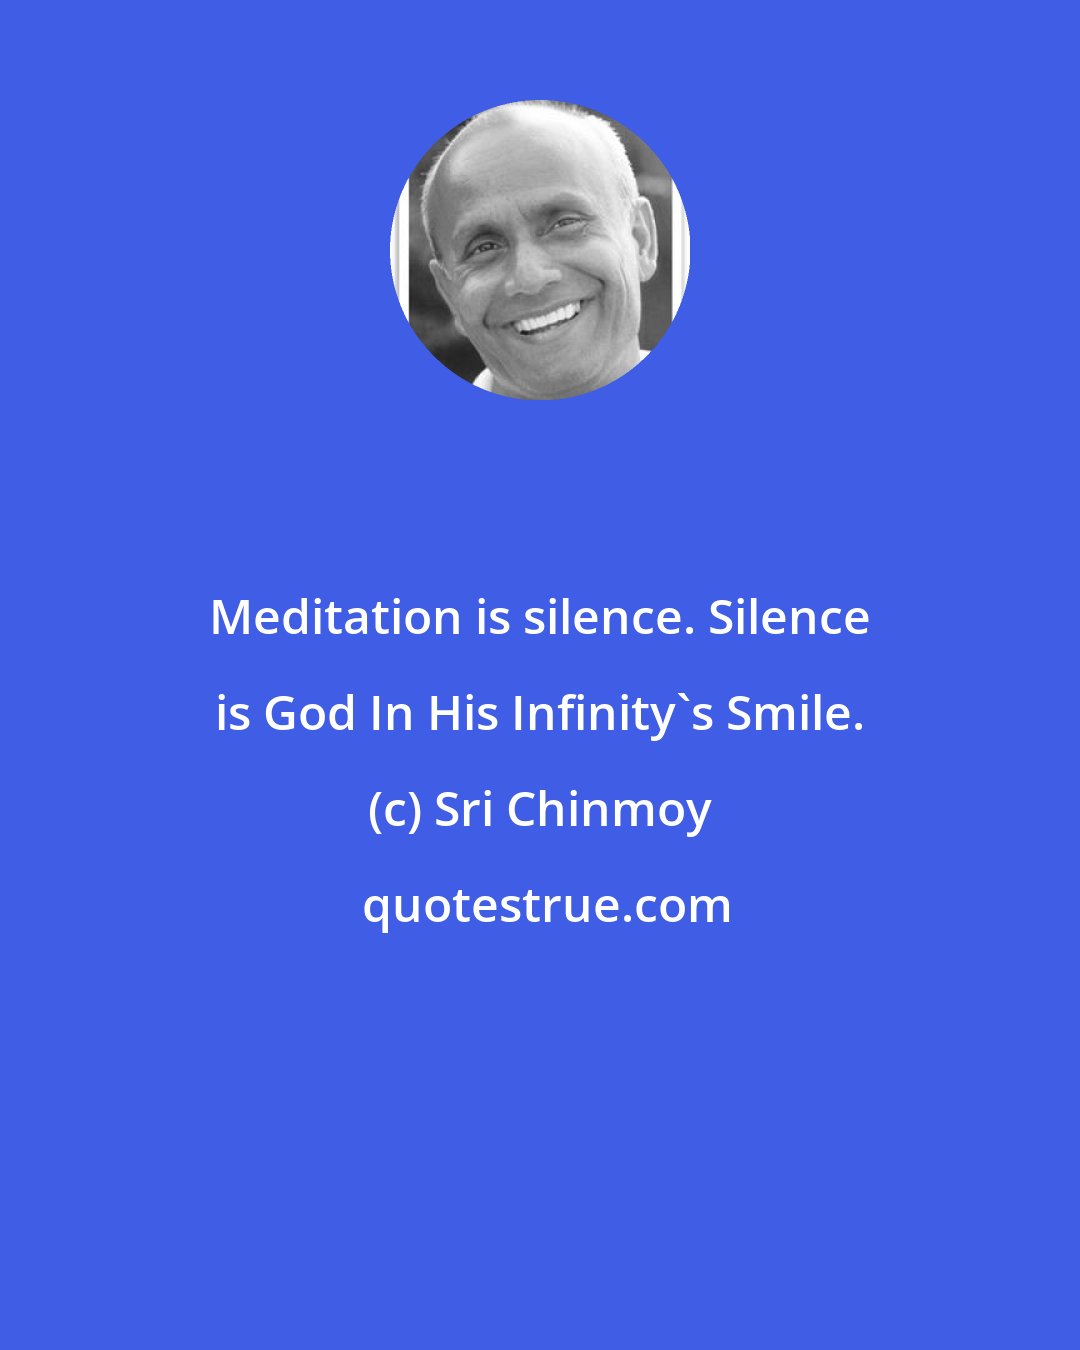 Sri Chinmoy: Meditation is silence. Silence is God In His Infinity's Smile.